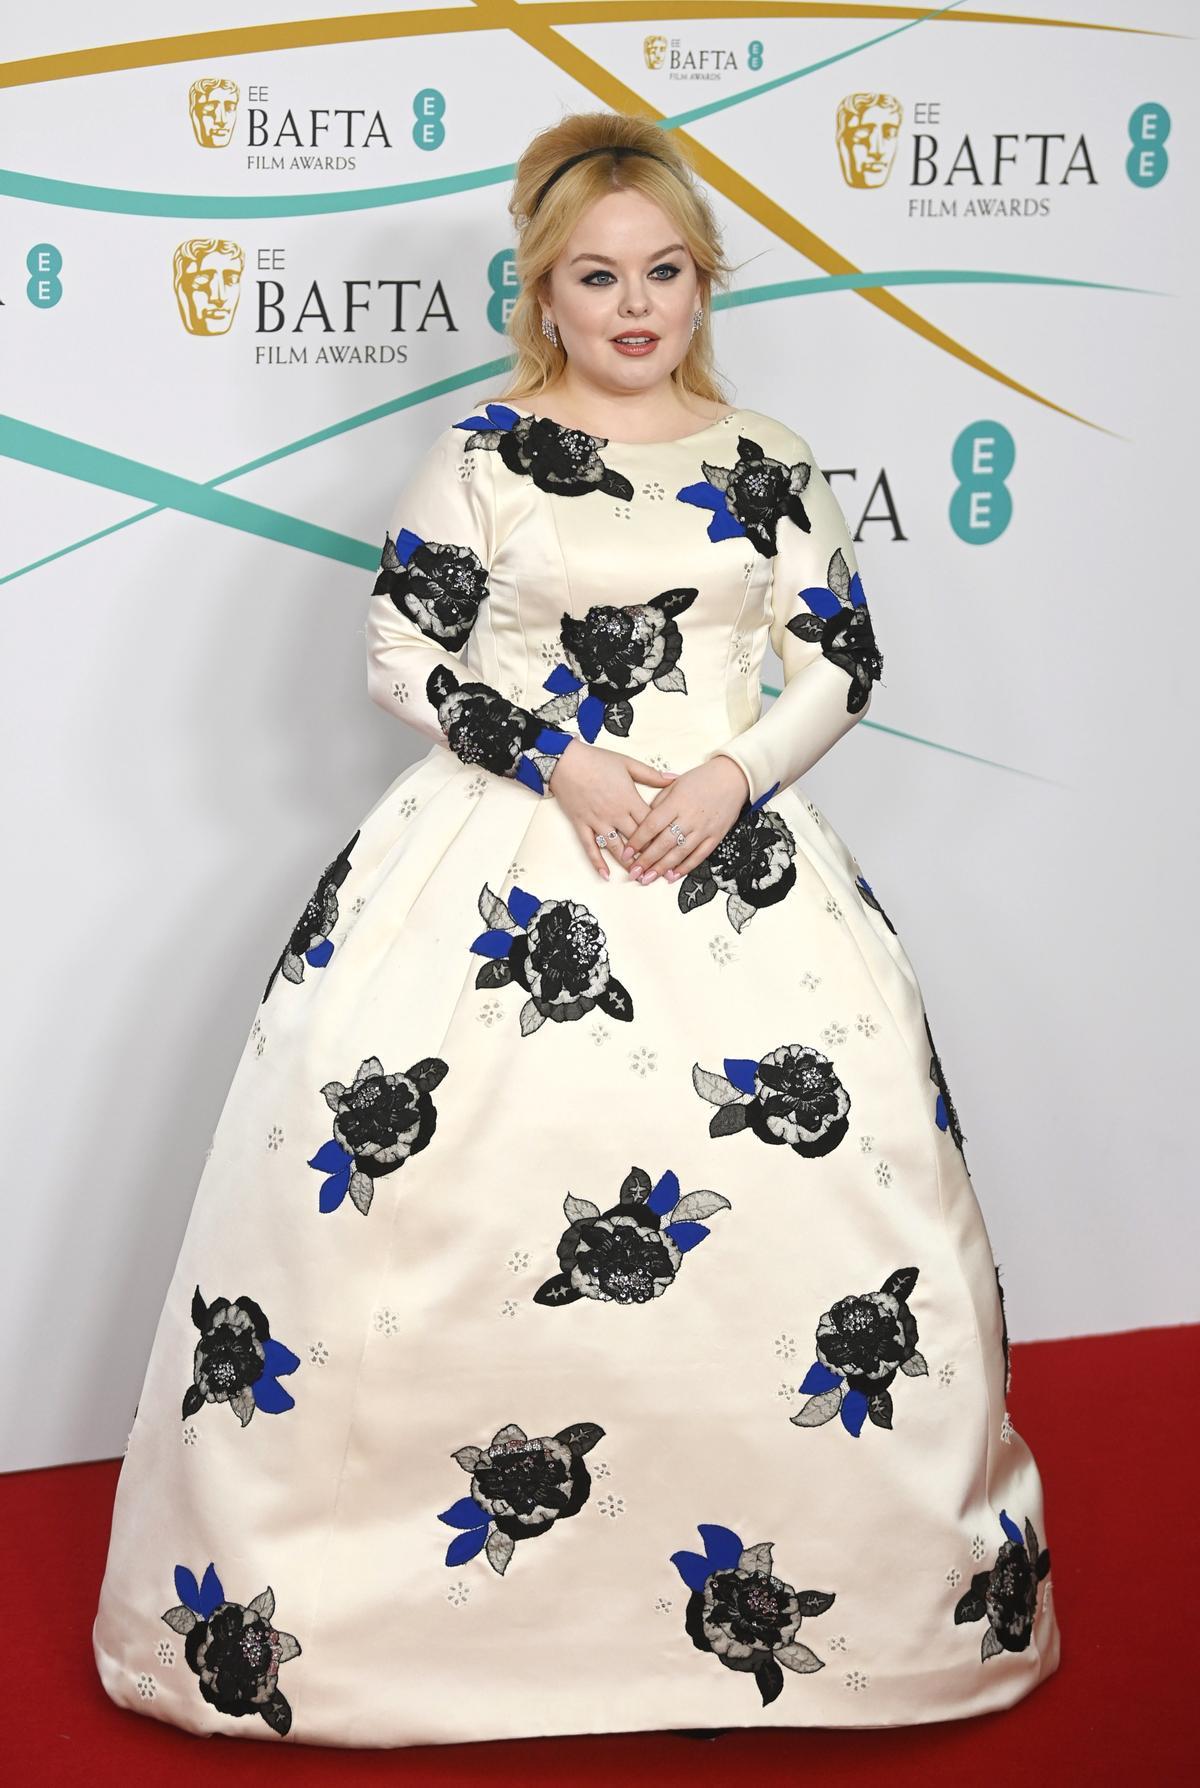 London (United Kingdom), 19/02/2023.- Nicola Coughlan arrives for the 2023 EE BAFTA Film Awards ceremony at the Southbank Centre in London, Britain, 19 February 2023. The event is hosted by the British Academy of Film and Television Arts (BAFTA). (Reino Unido, Londres) EFE/EPA/NEIL HALL